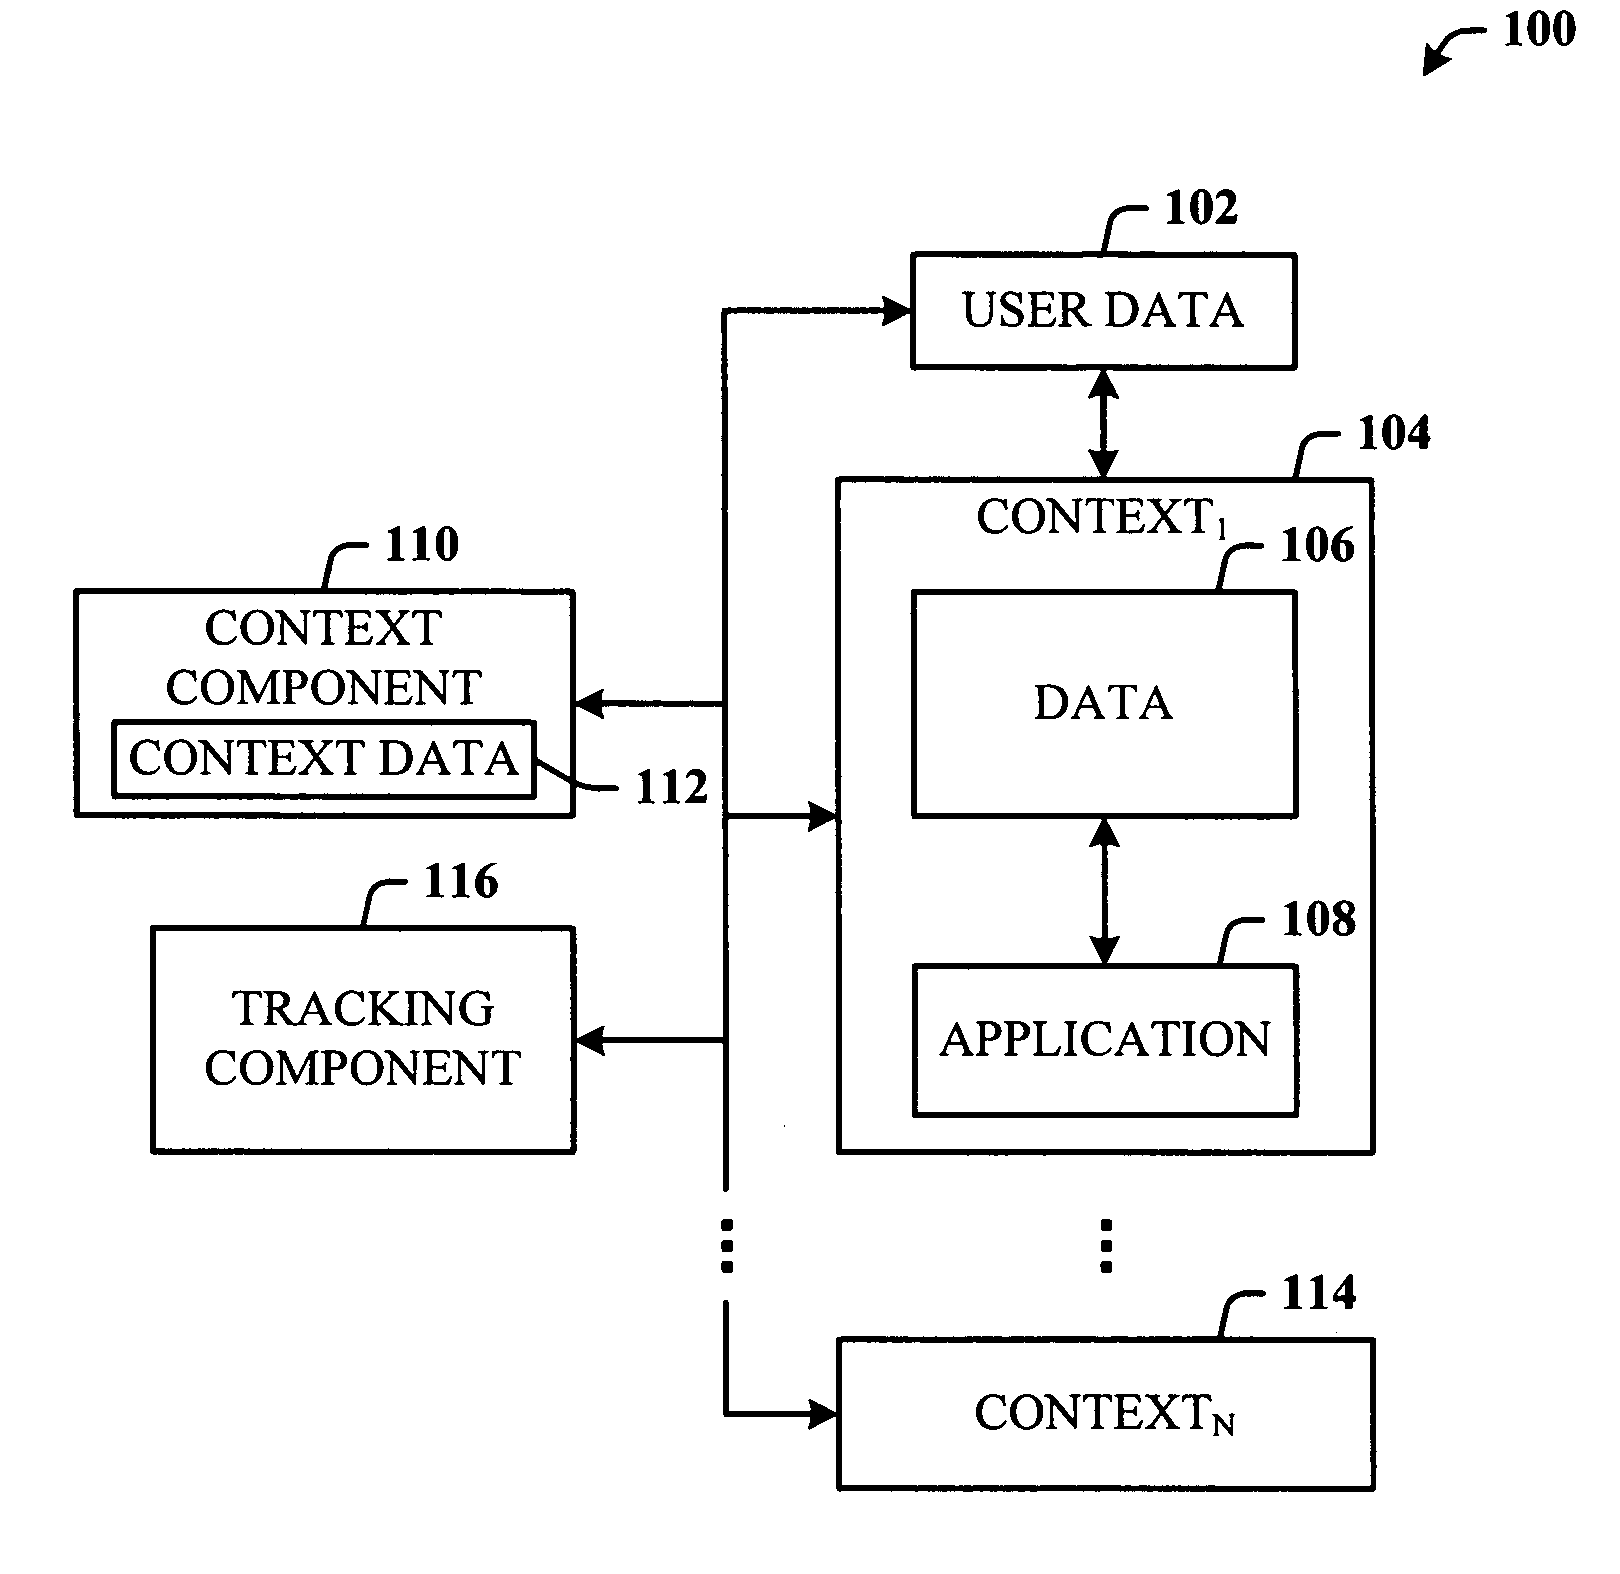 Dynamic association of electronically stored information with iterative workflow changes